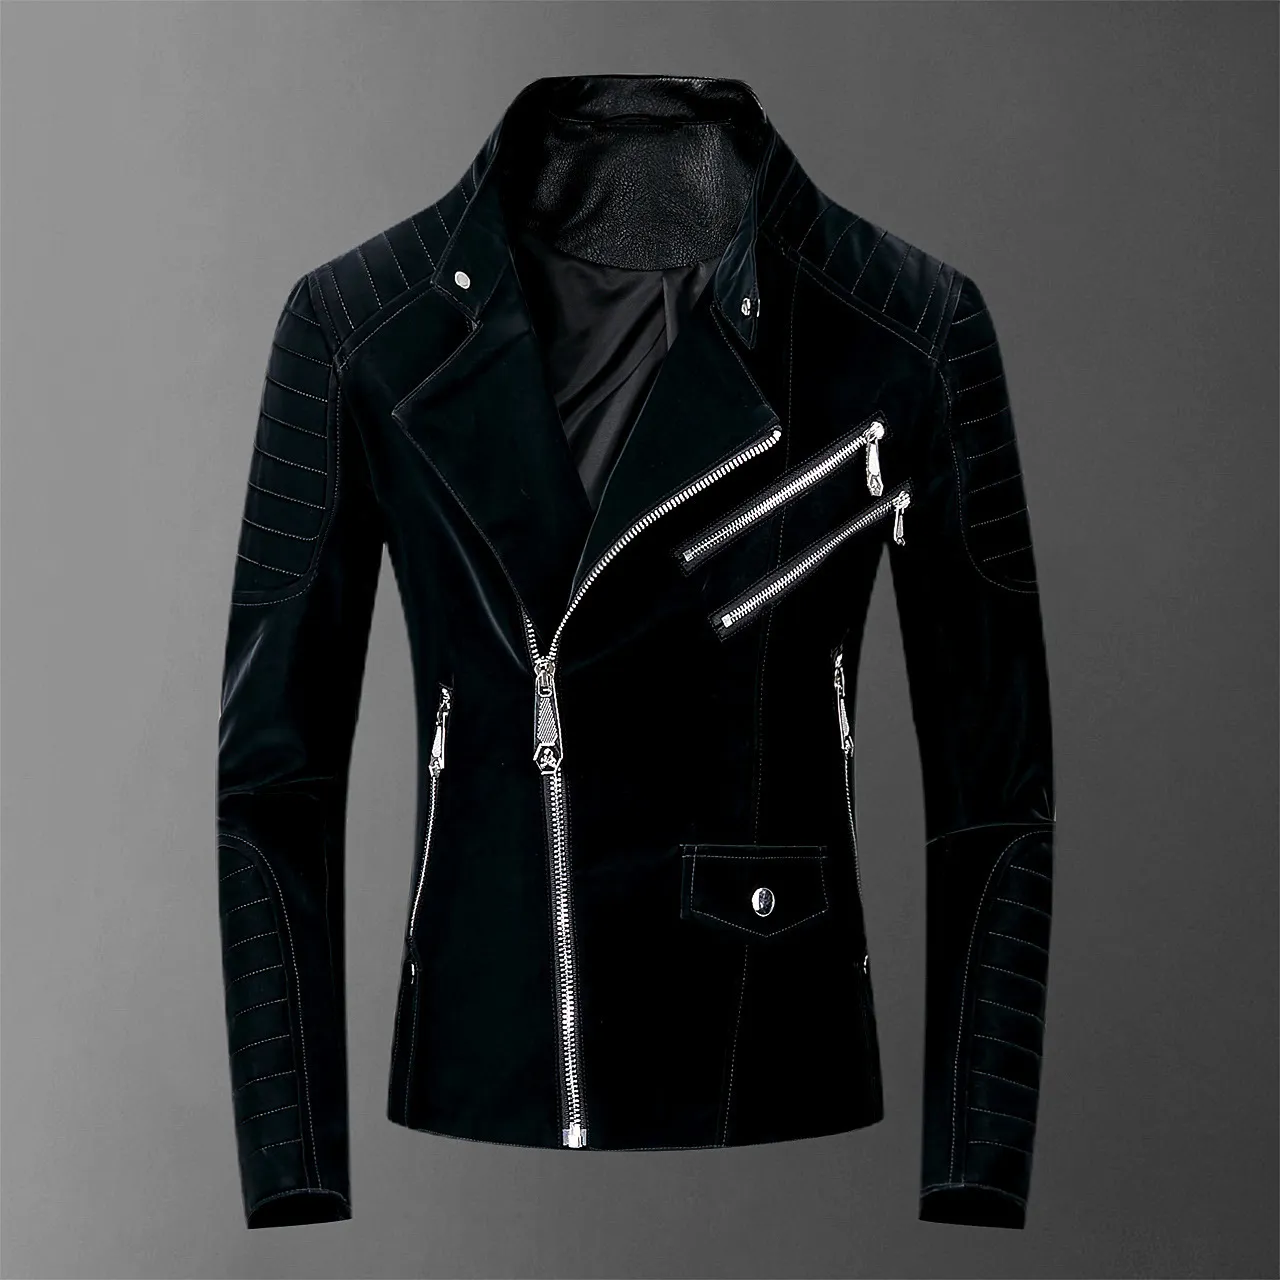 Skull Bonded Leather Red Jackets Men High Street Style Turn-down Neck Streetwear Mens Jackets and Coats Casacas Para Hombre 201022